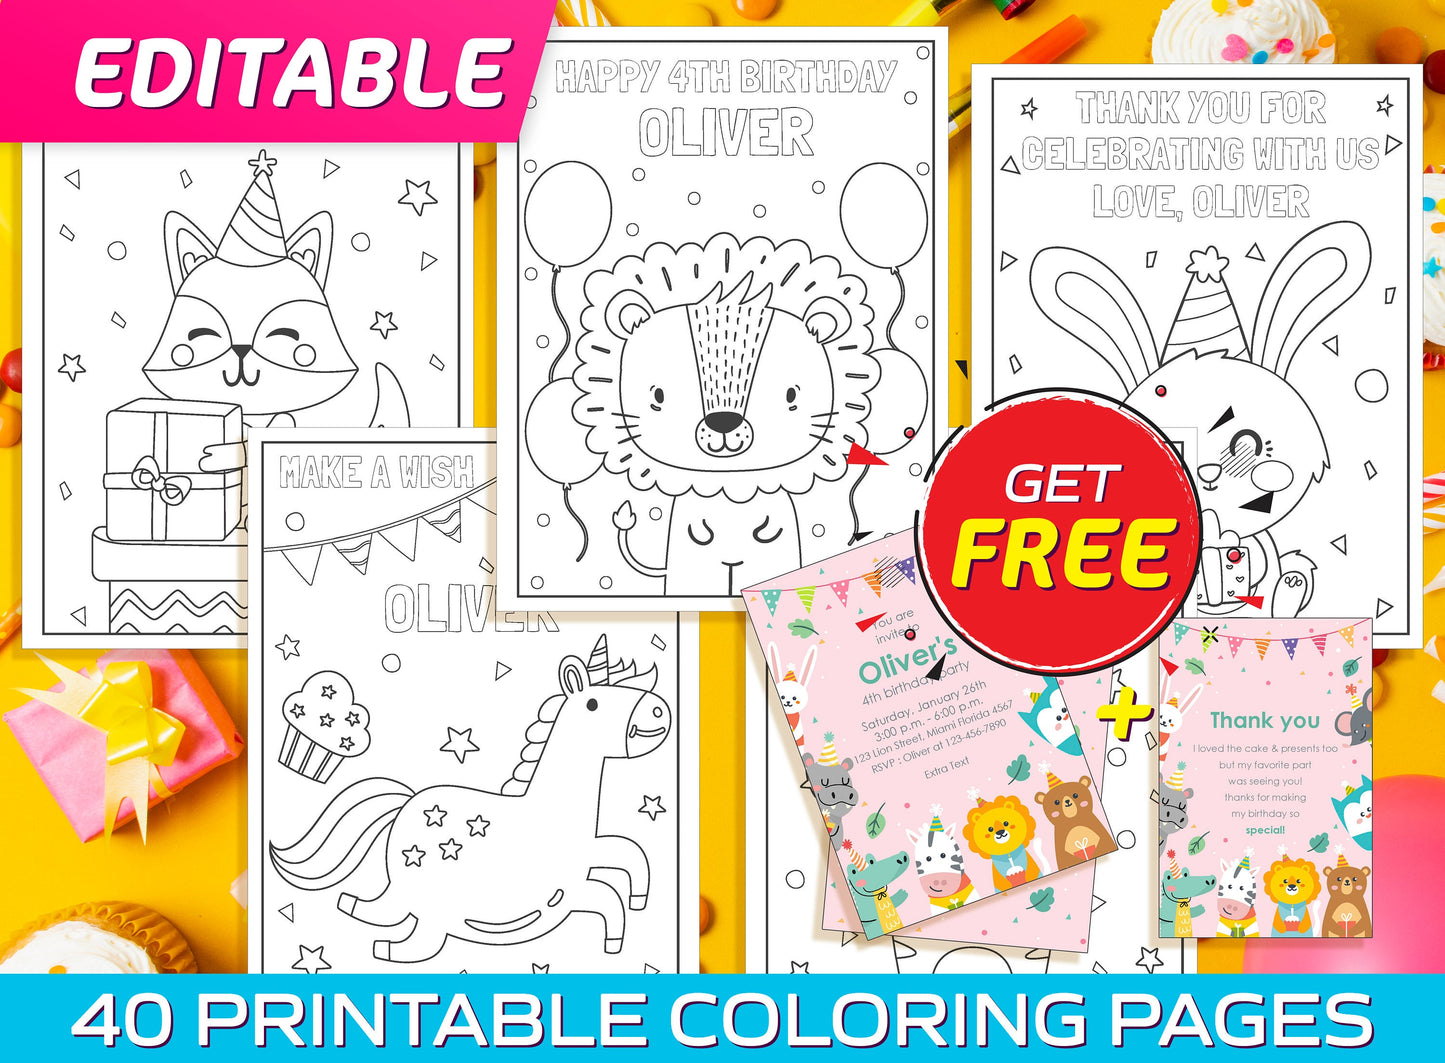 Editable Birthday Coloring Pages - 40 Printable & Editable Birthday Coloring Pages for Kids, Boys, Girls. Free Invitation + Thank You Card.